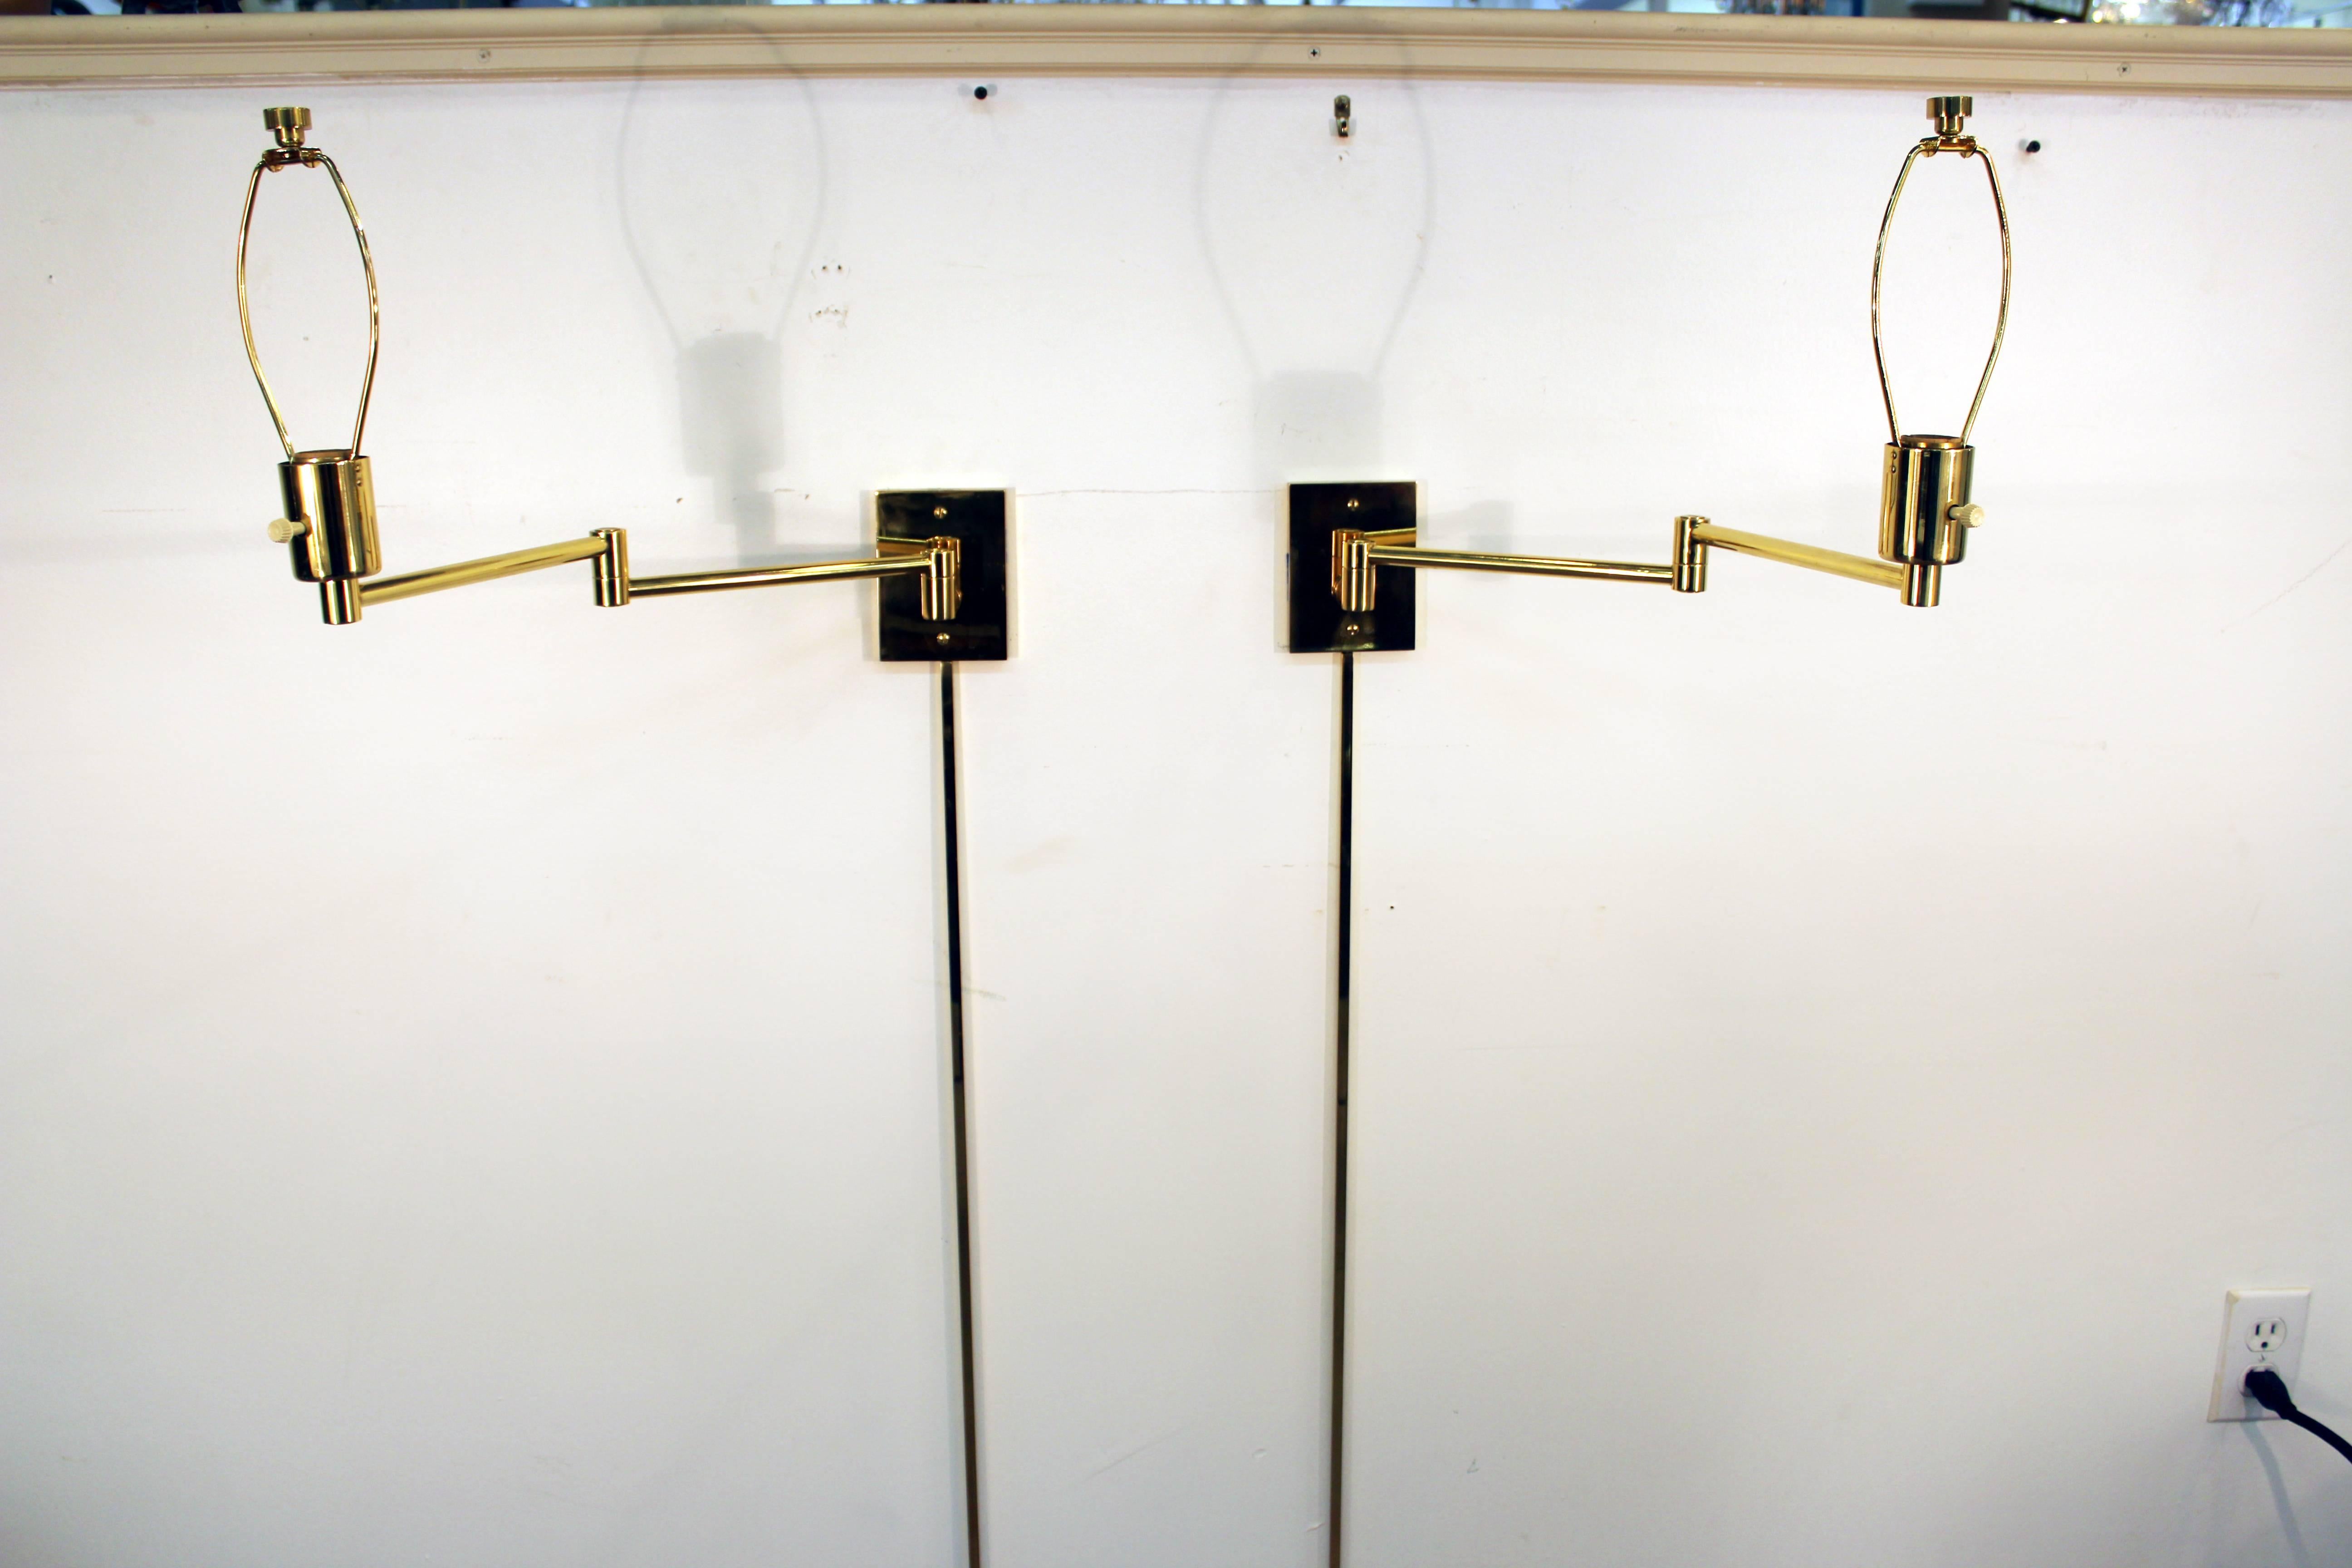 Pair of Wall gold-tone sconces by Metalarte for Hansen with extending double swing arms and brass cord covers; fully marked. In over all good condition with minor wear to surface.

Multiple pairs available



   